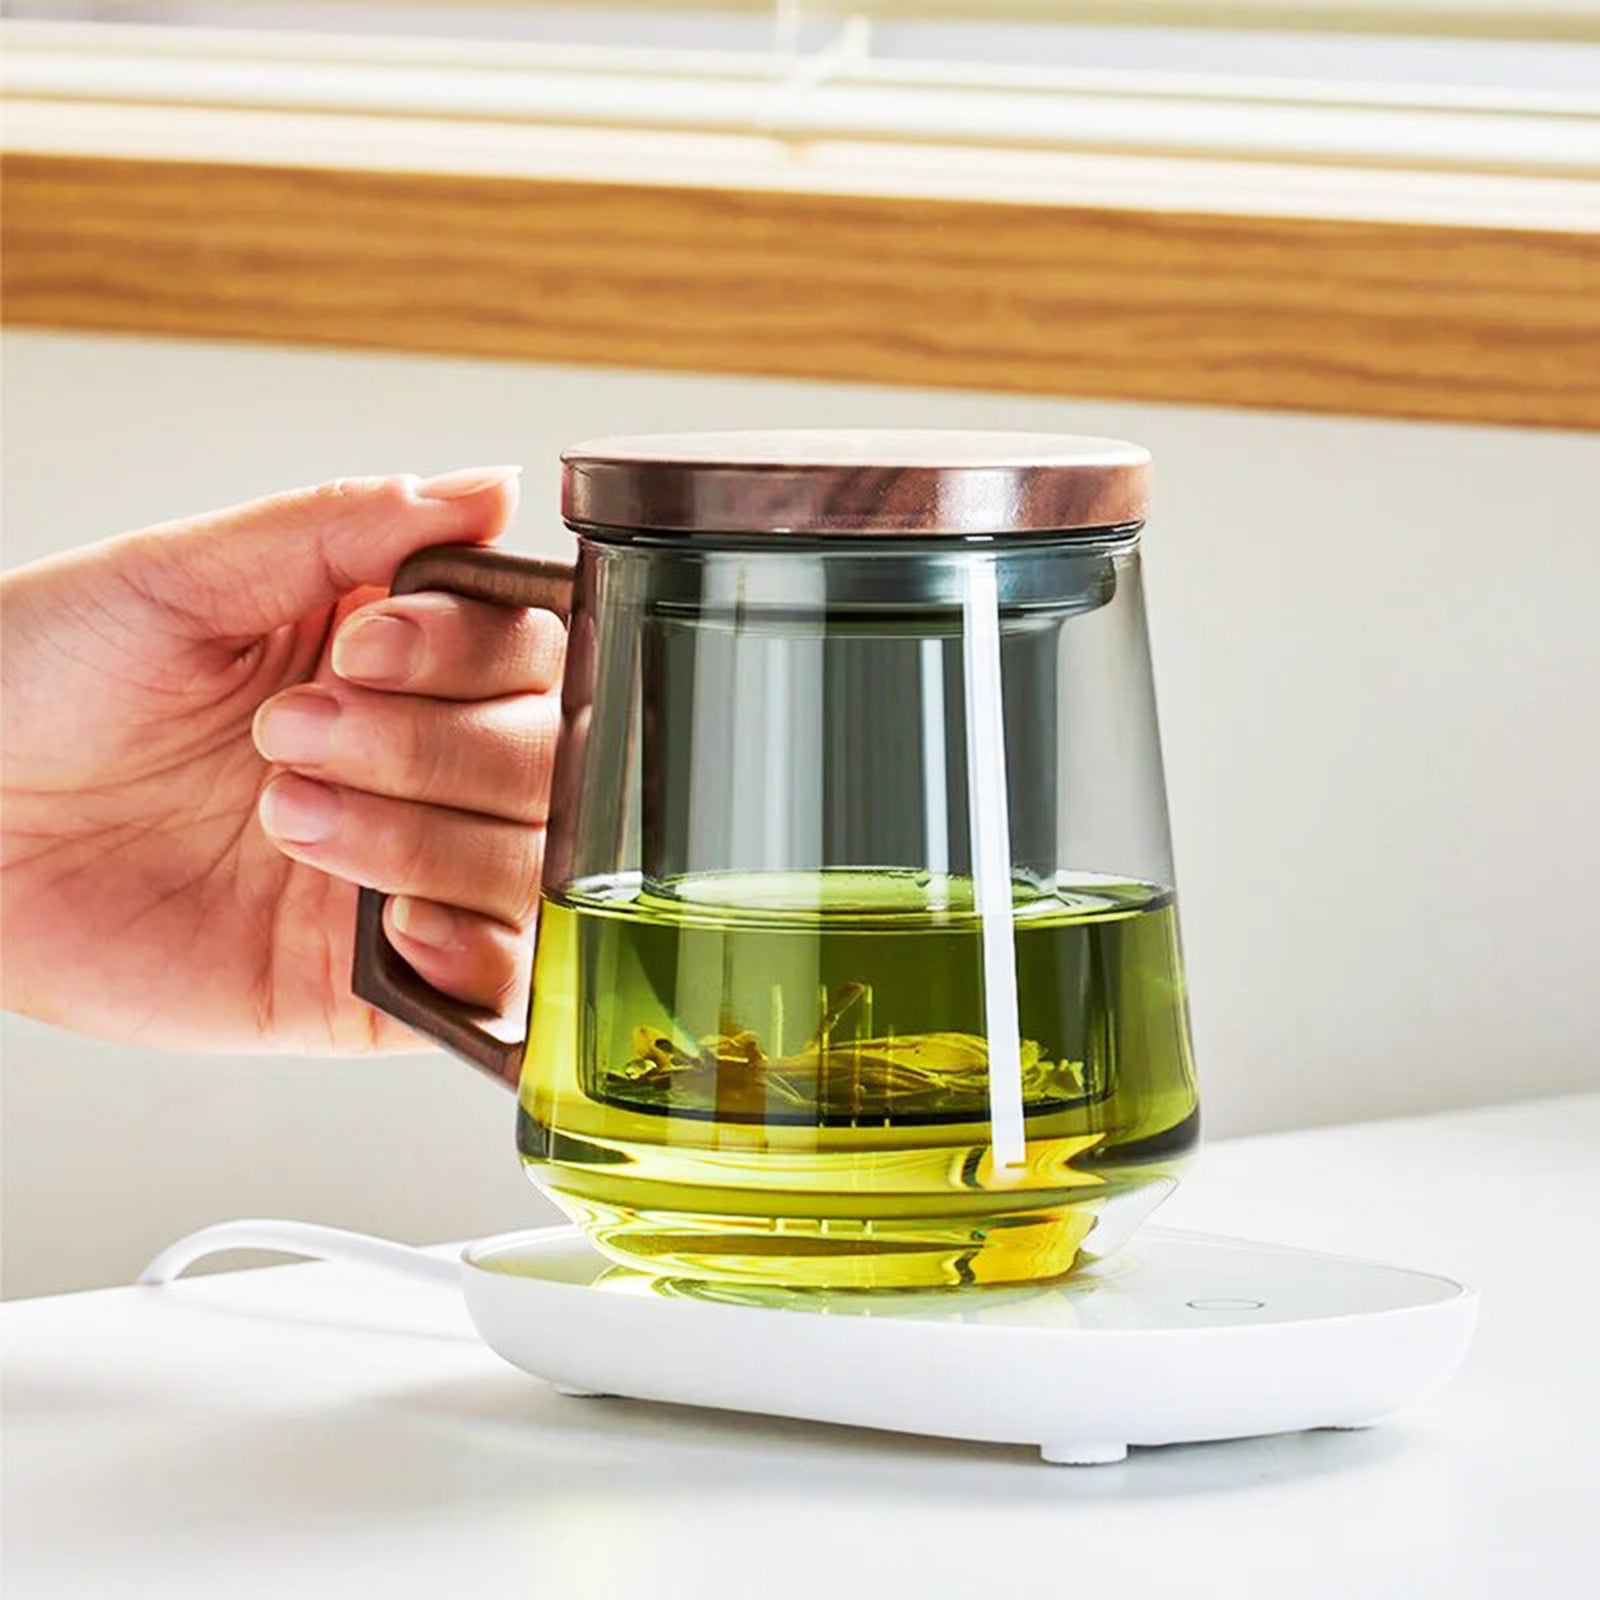 Modern Glass Mug with Wooden Accents